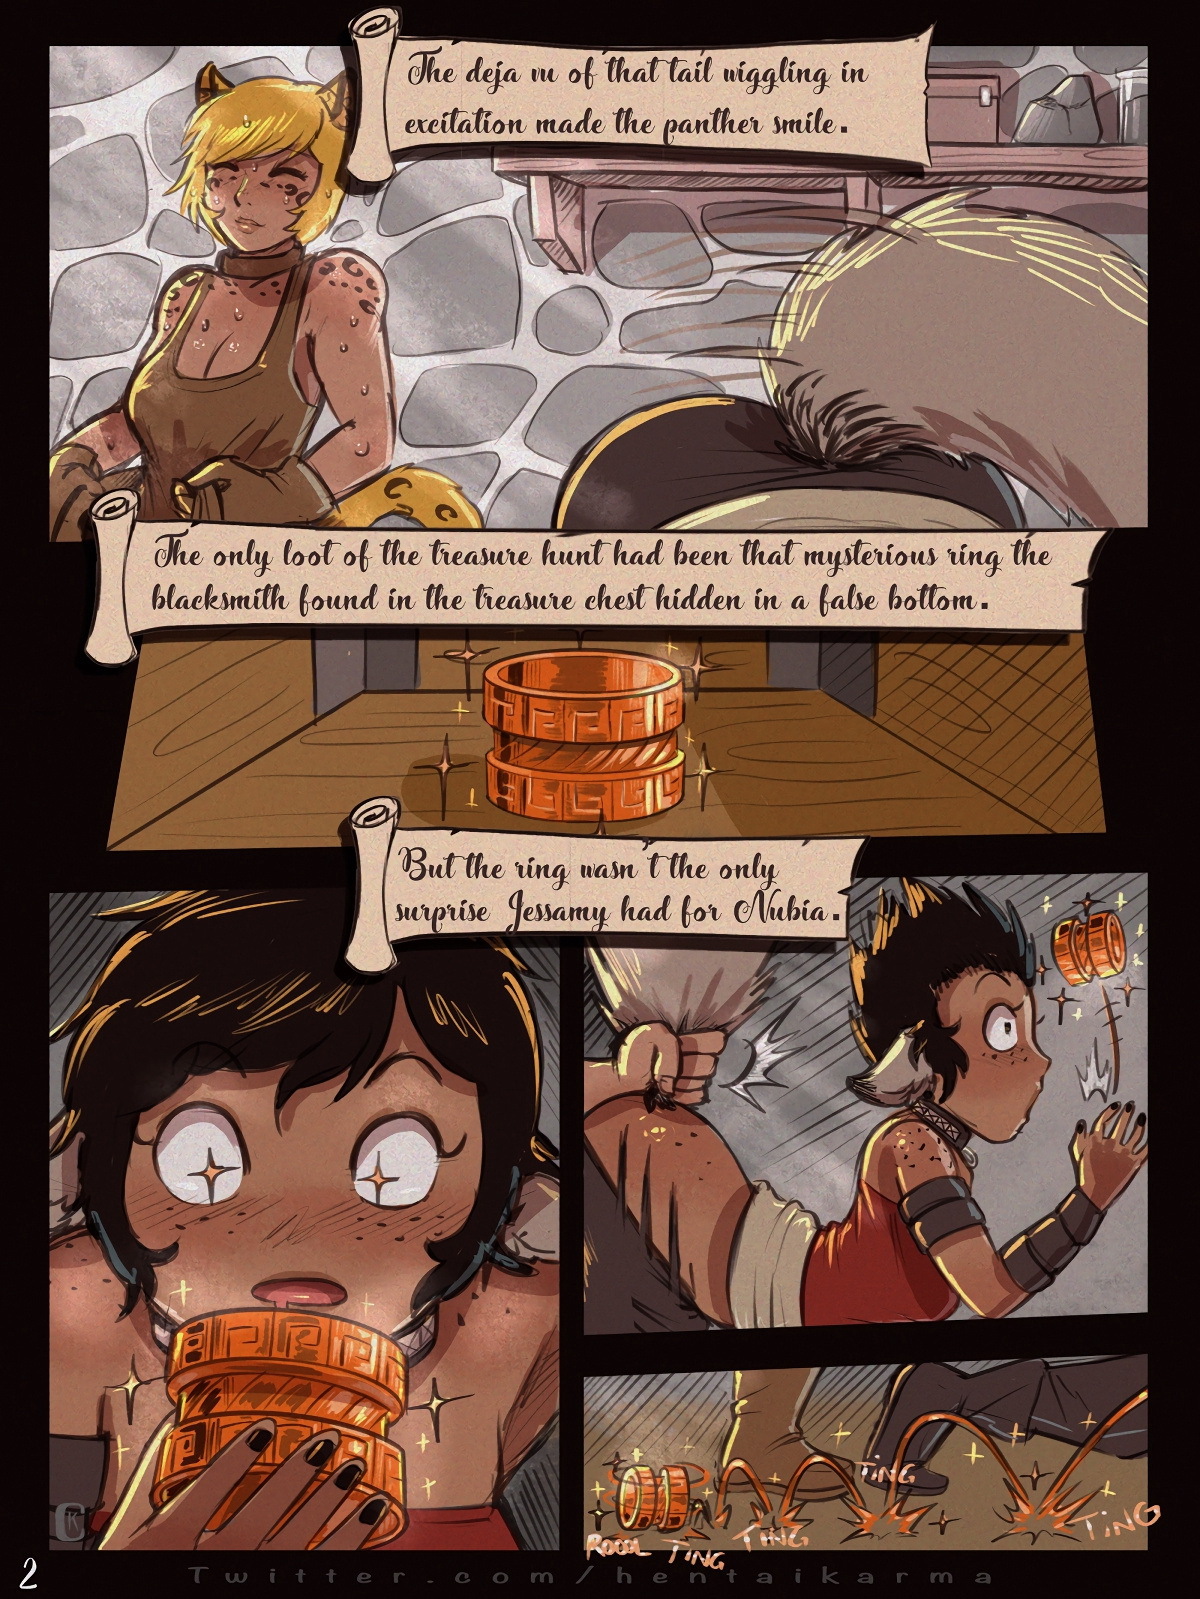 The swindler's tale 2: Outfoxing the Fox - Page 3